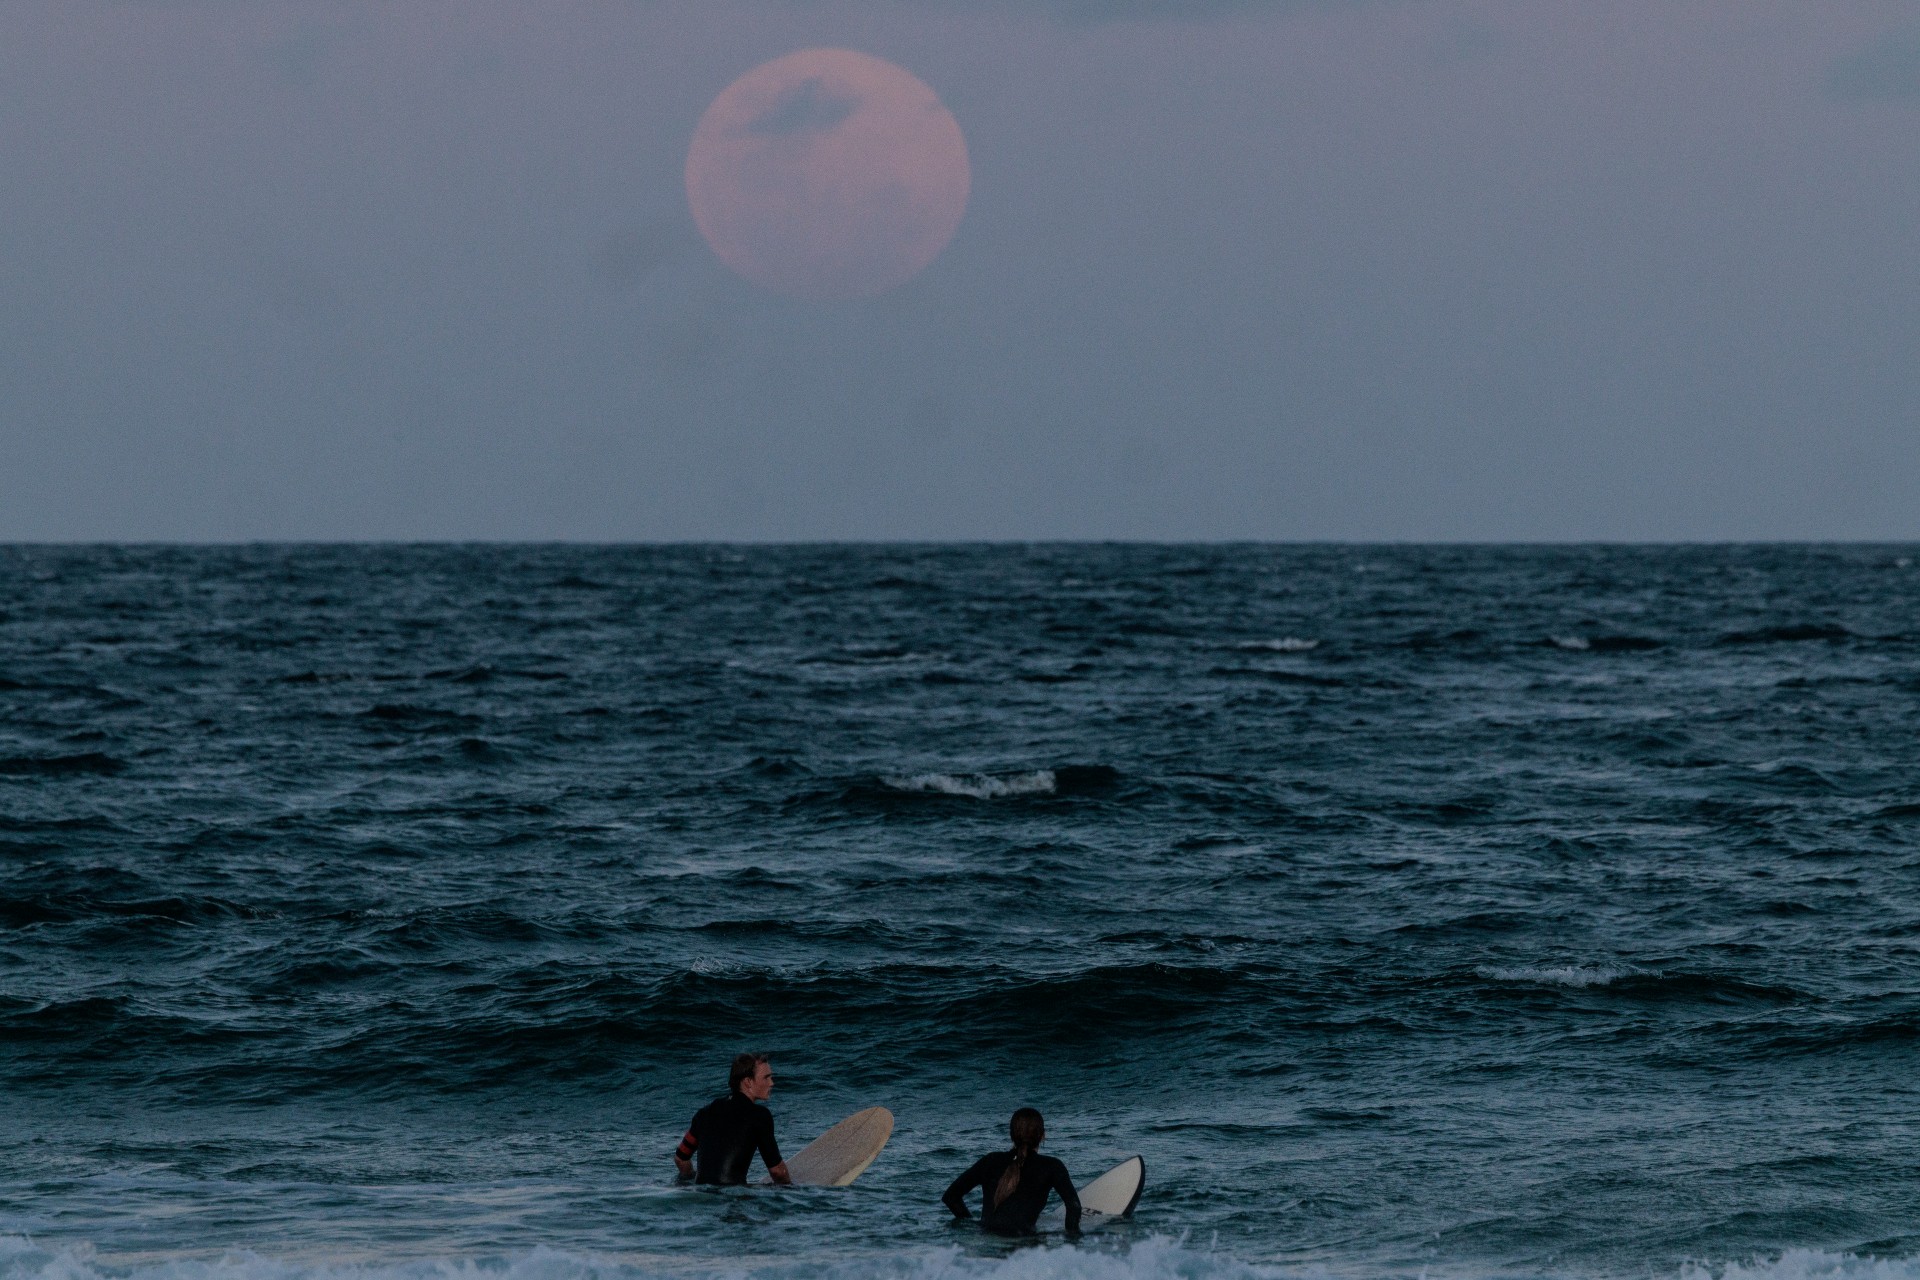 At Manly Beach in Sydney, surfers take to the waves beneath the large red moon's face. (Photo by Brook Mitchell via Getty Images)